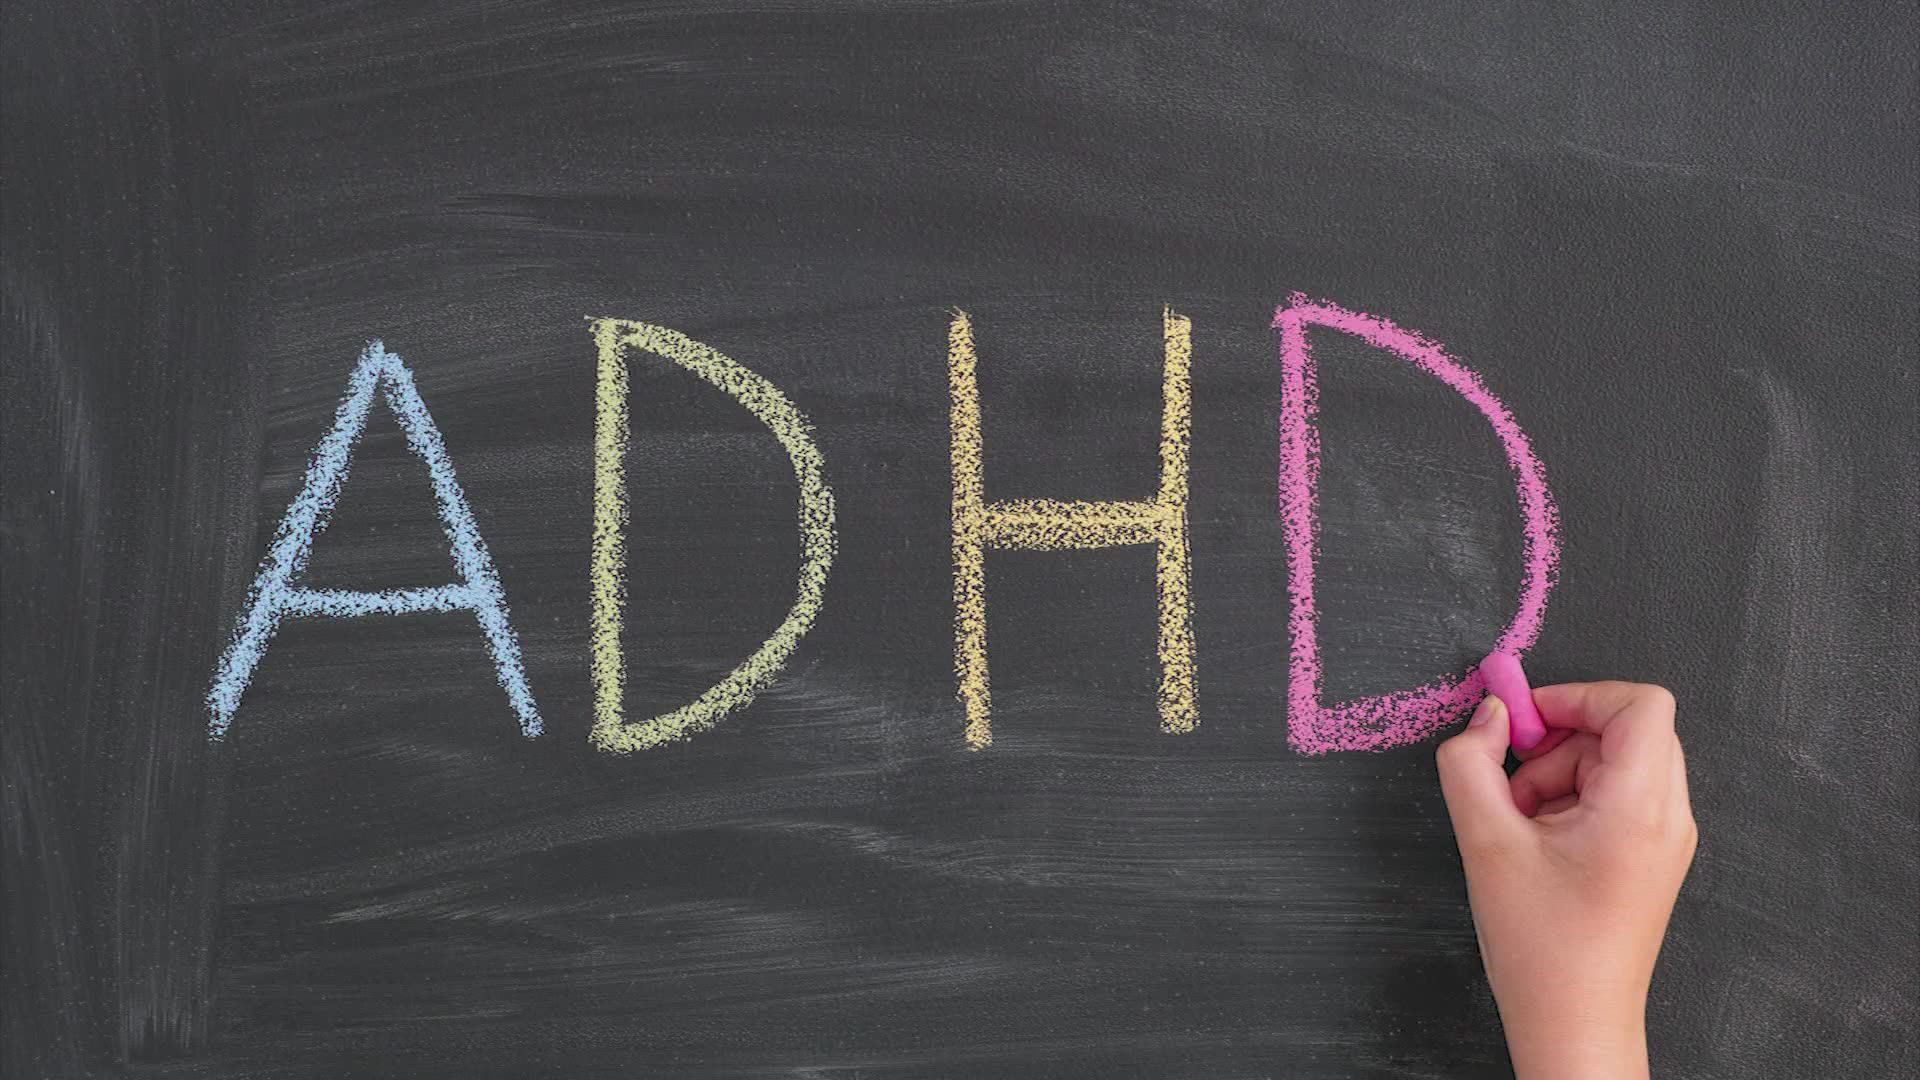 Adult diagnoses of ADHD are growing at a rate four-times faster than cases in children, according to study published in JAMA.